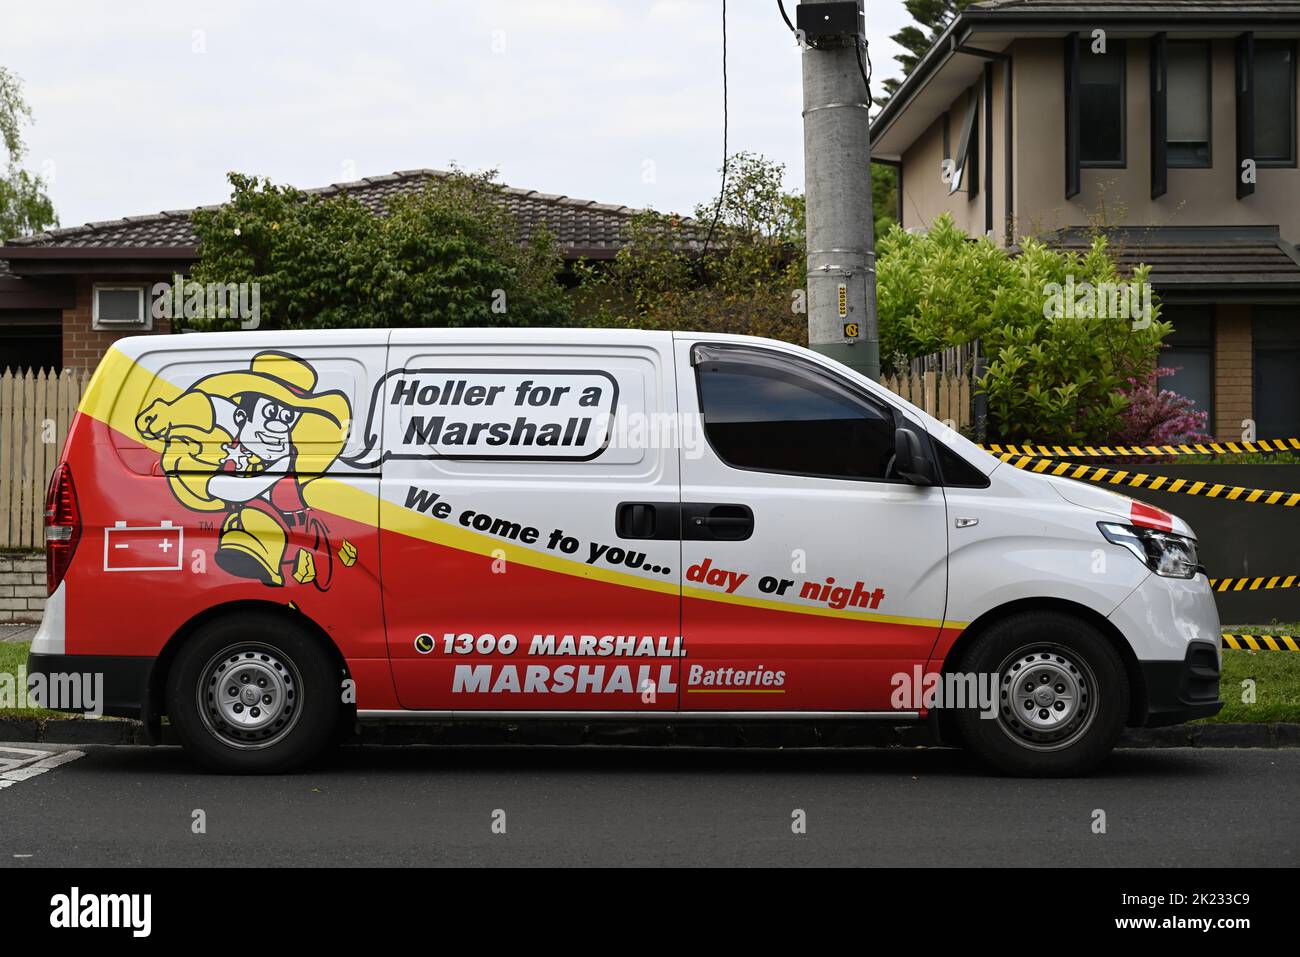 Side view of a Marshall Batteries van, a Hyundai iLoad, parked in a suburban street during an overcast day Stock Photo